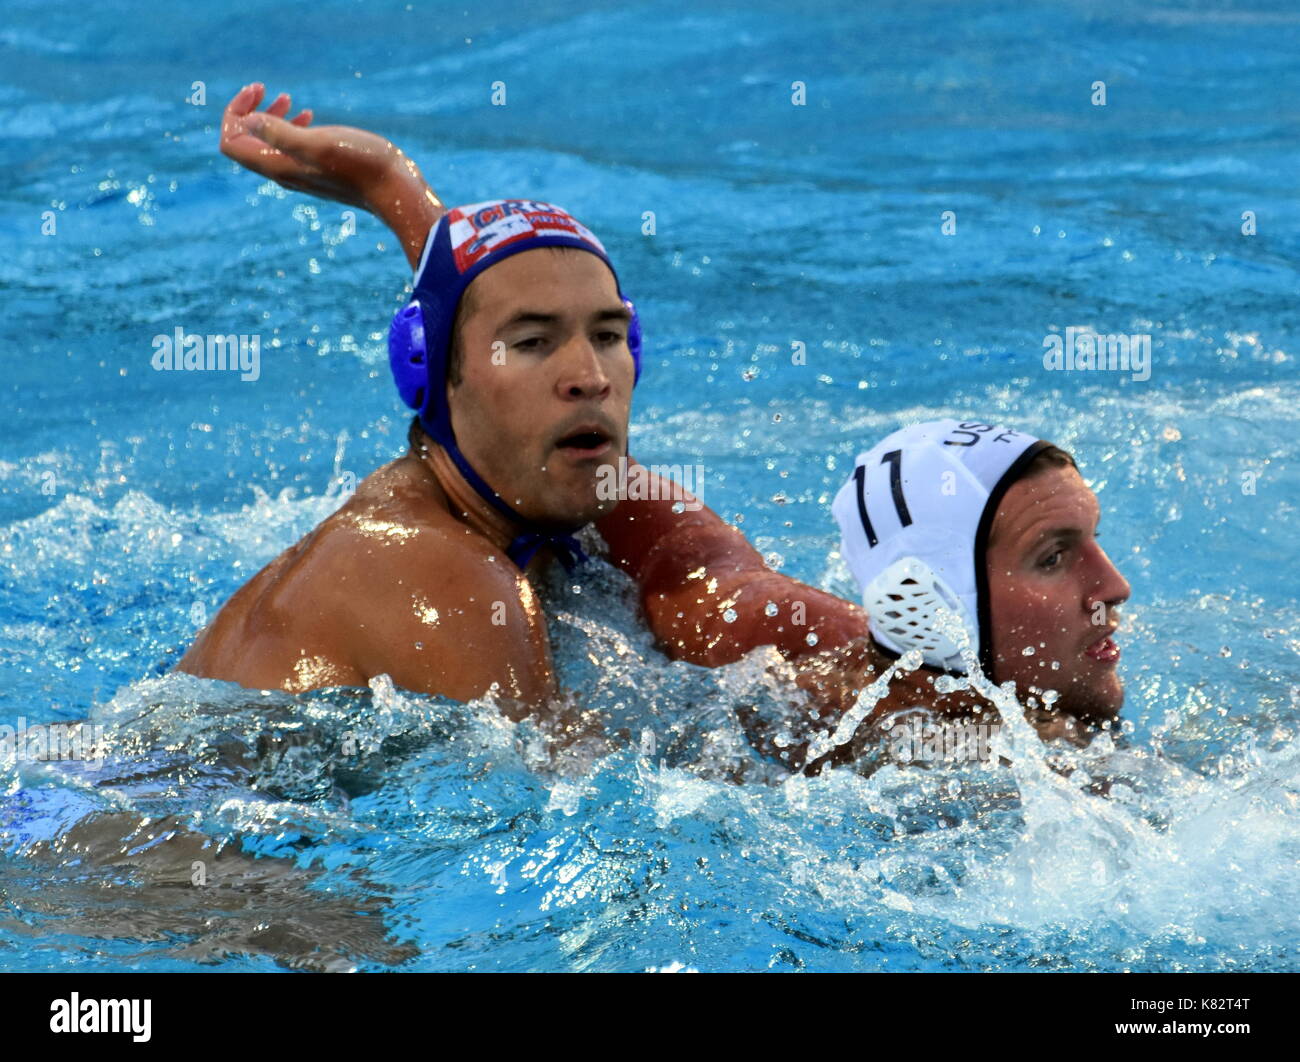 Budapest, Hungary - Jul 17, 2017. KRAPIC Ivan (CRO) playing against ROELSE Alex (USA) in the preliminary round. FINA Waterpolo World Championship was  Stock Photo